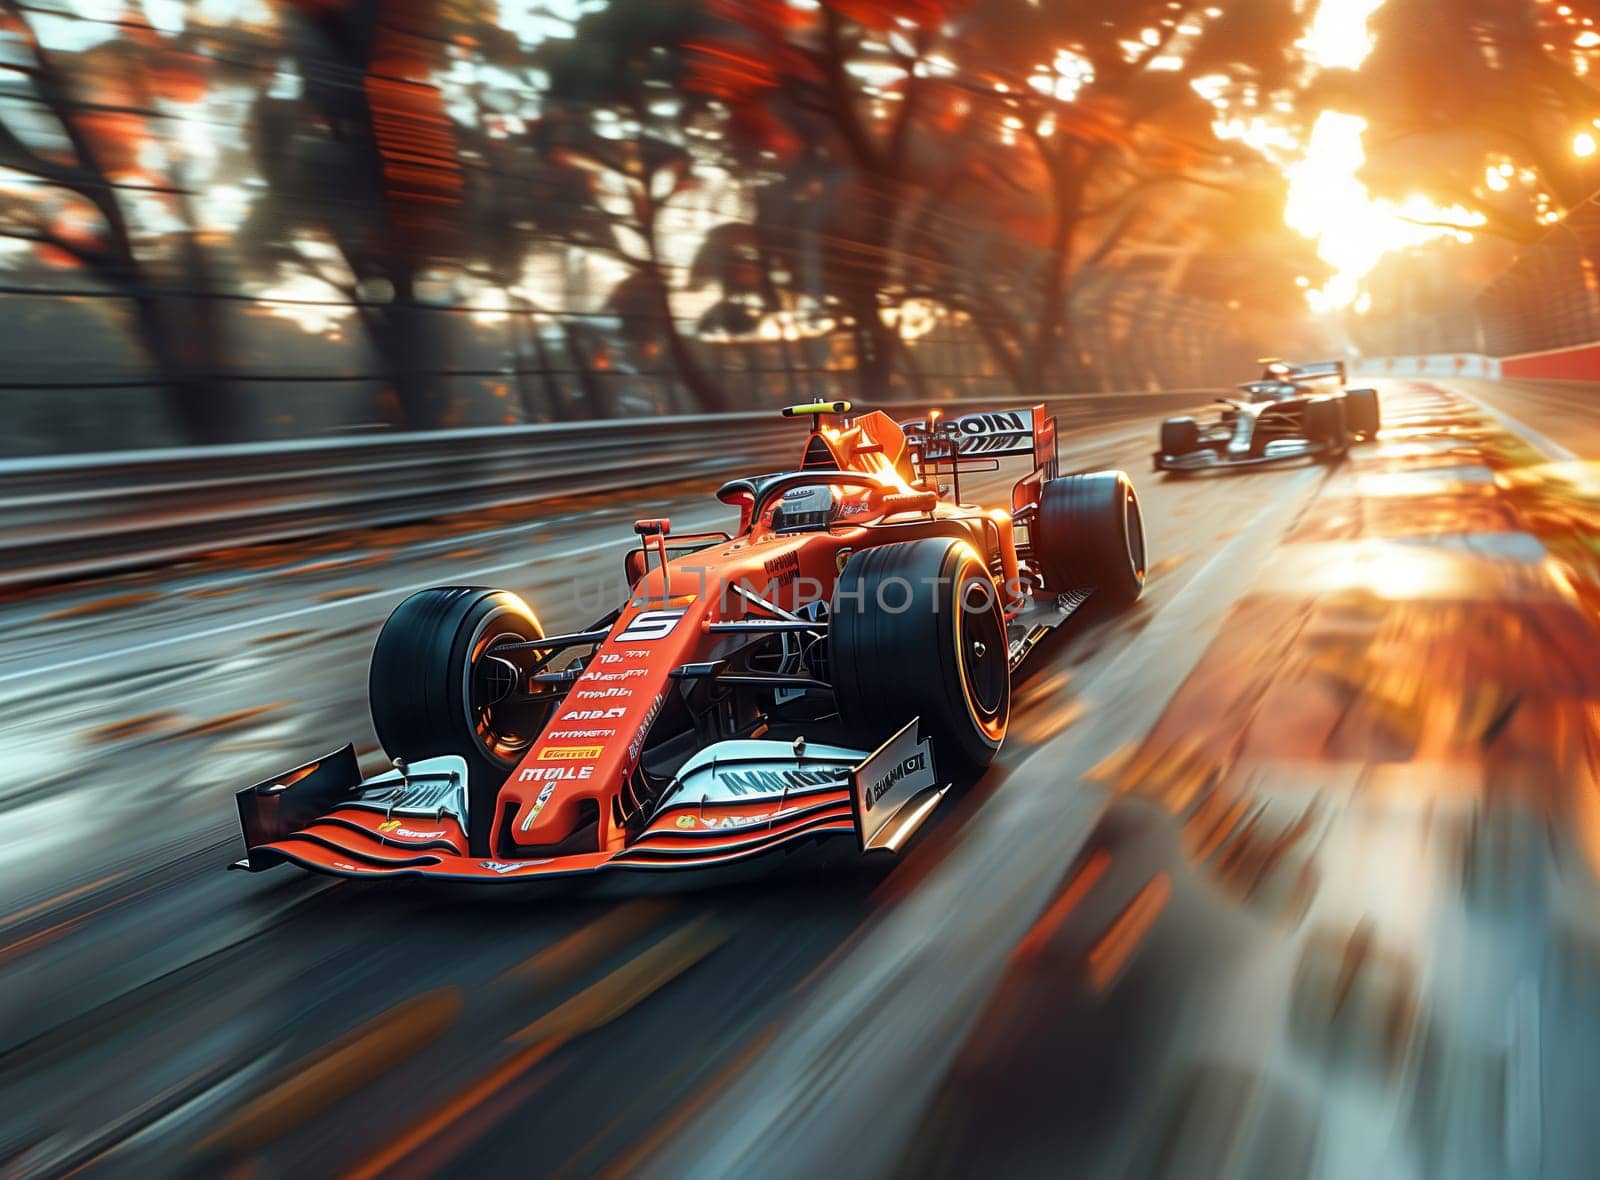 A racing car with sleek automotive design is speeding down the asphalt track at sunset, with its tires gripping the road and headlights shining brightly